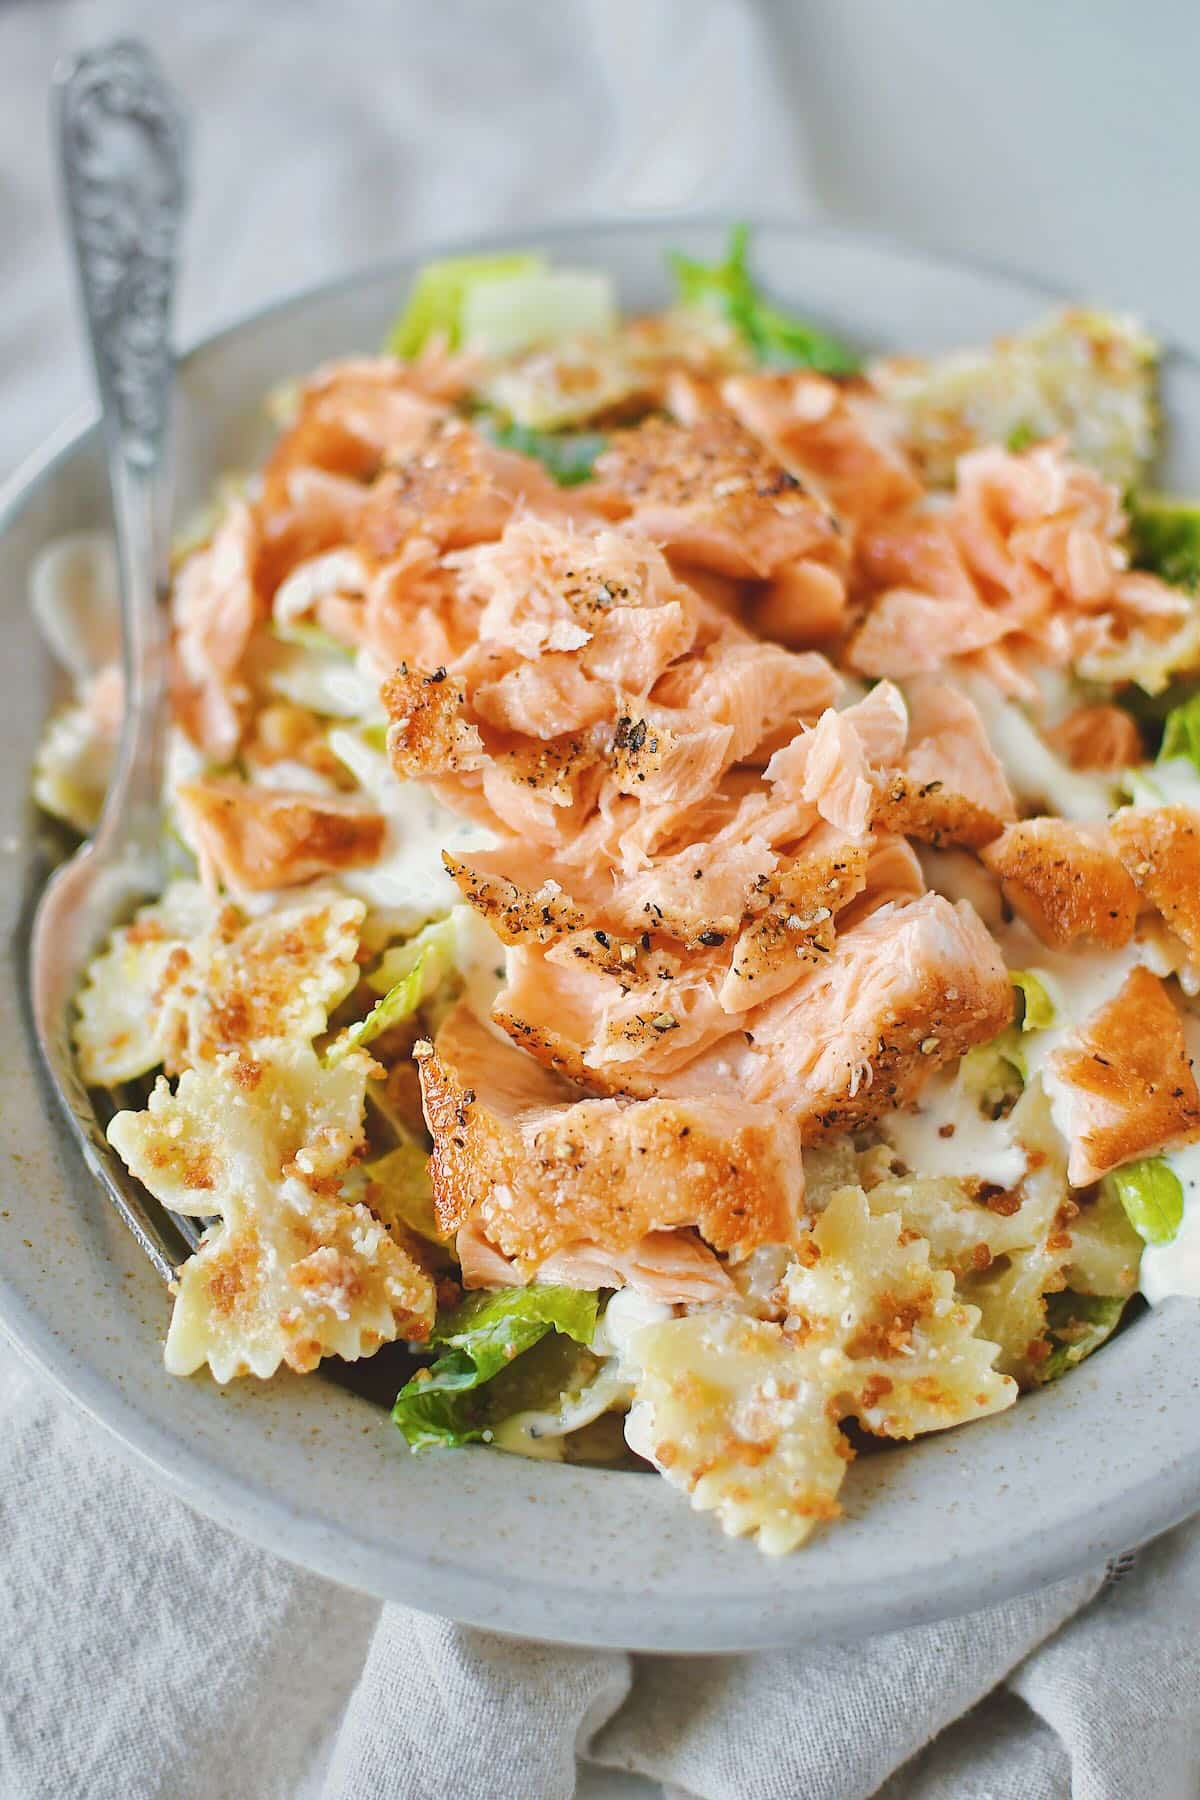 Caesar Pasta Salad served in a bowl and topped with a pan seared salmon fillet that has been cooked and flaked over the top.